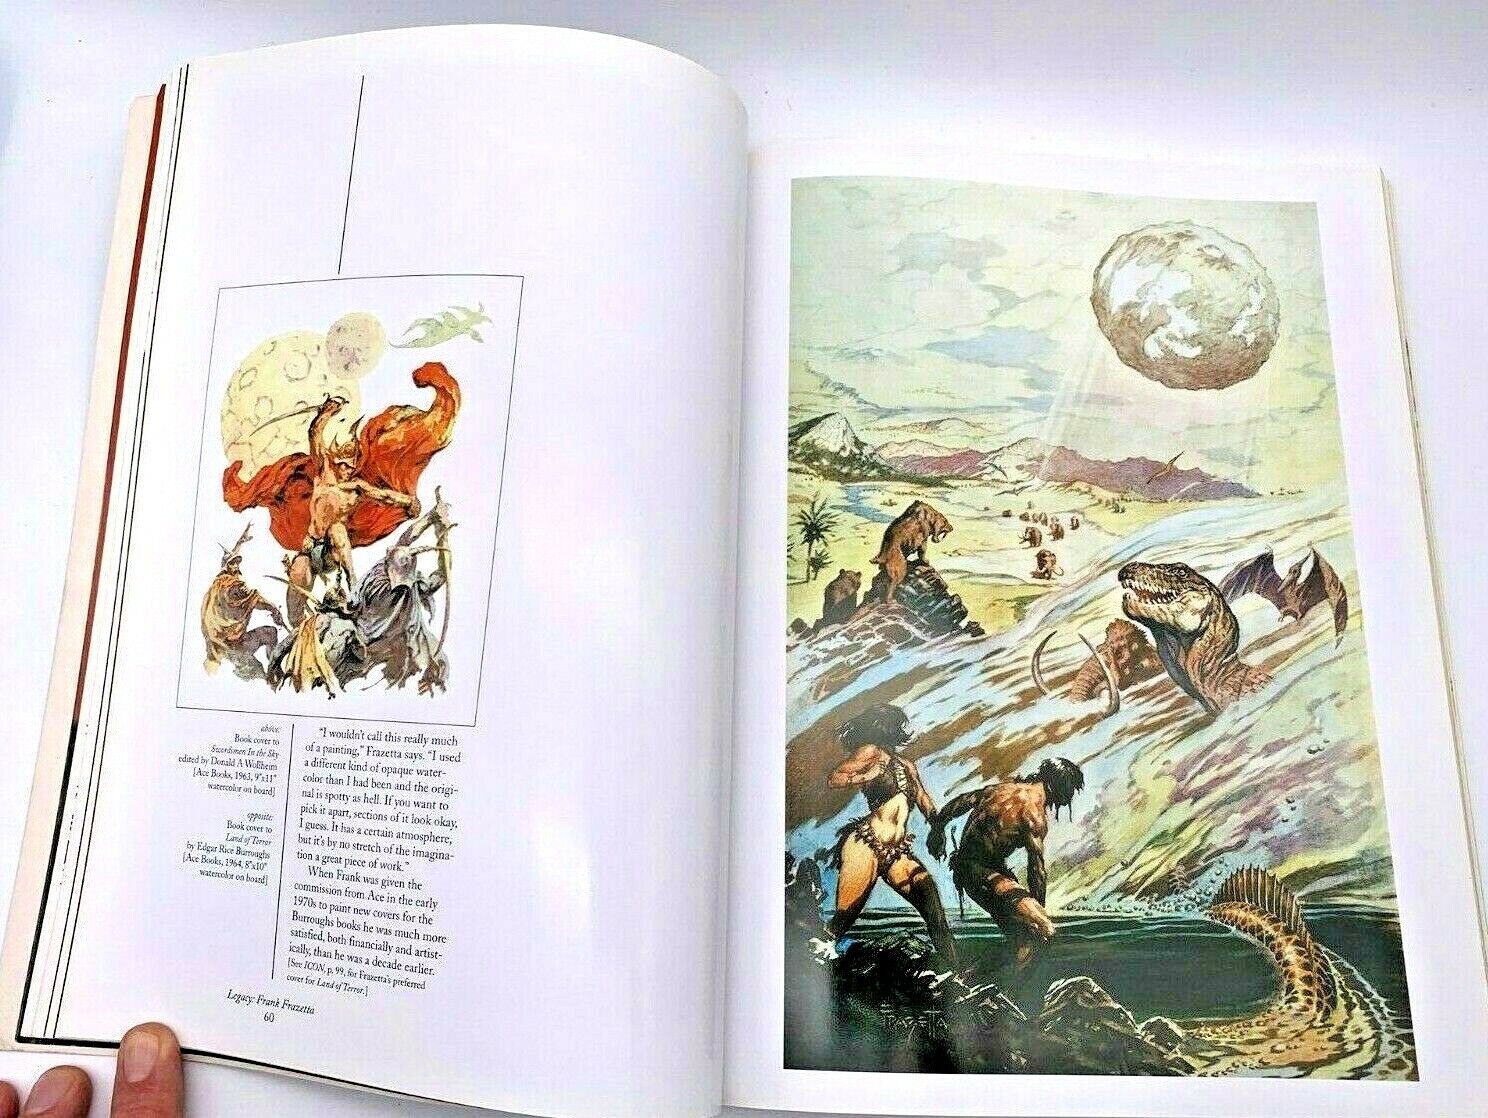 Legacy : Selected Paintings and Drawings by Frank Frazetta (2008 